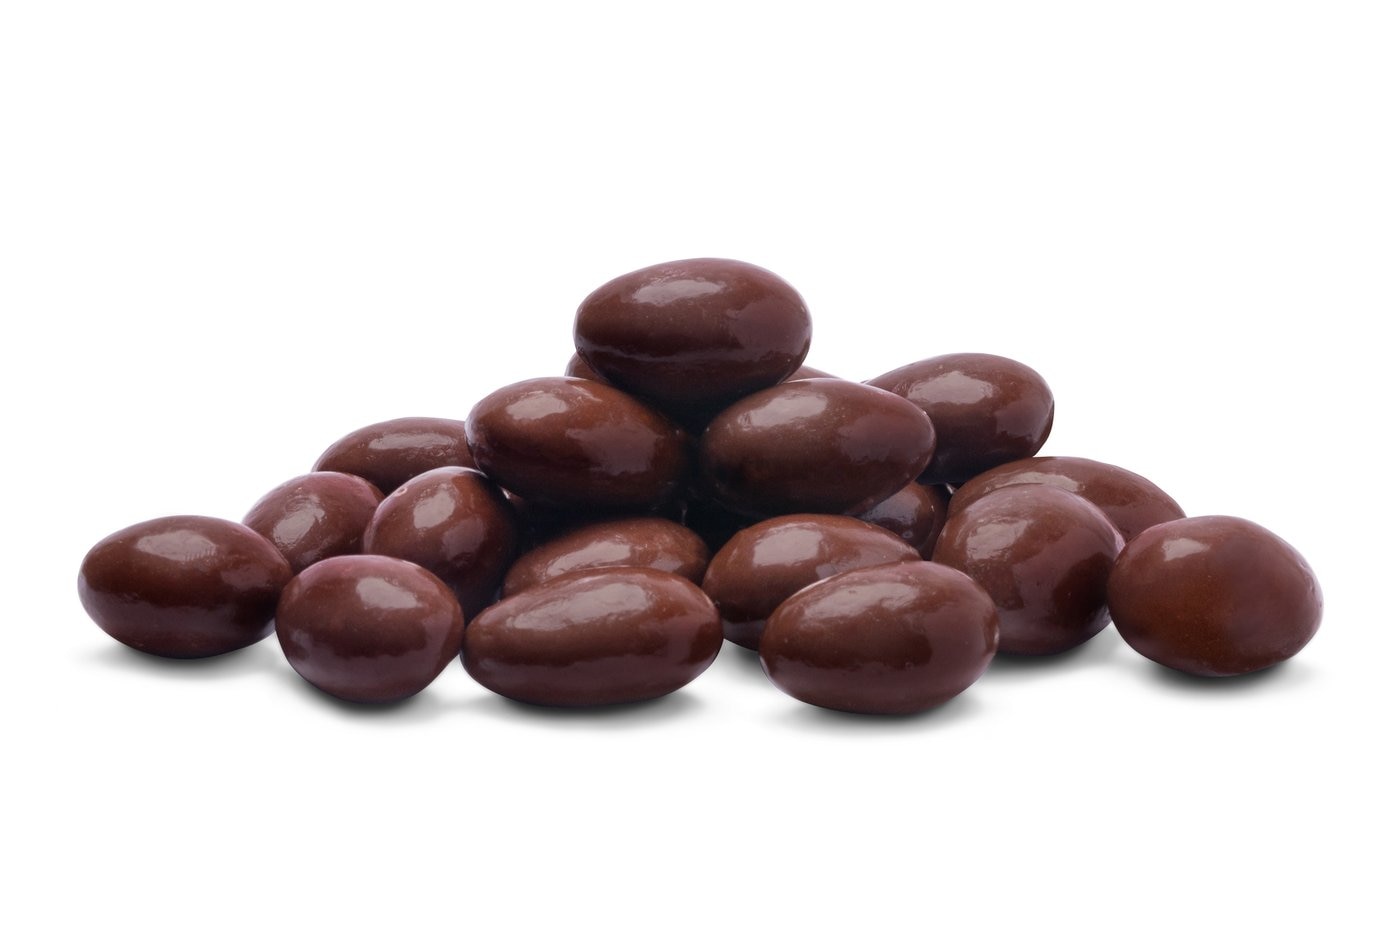 Chocolate-Covered Almonds image zoom